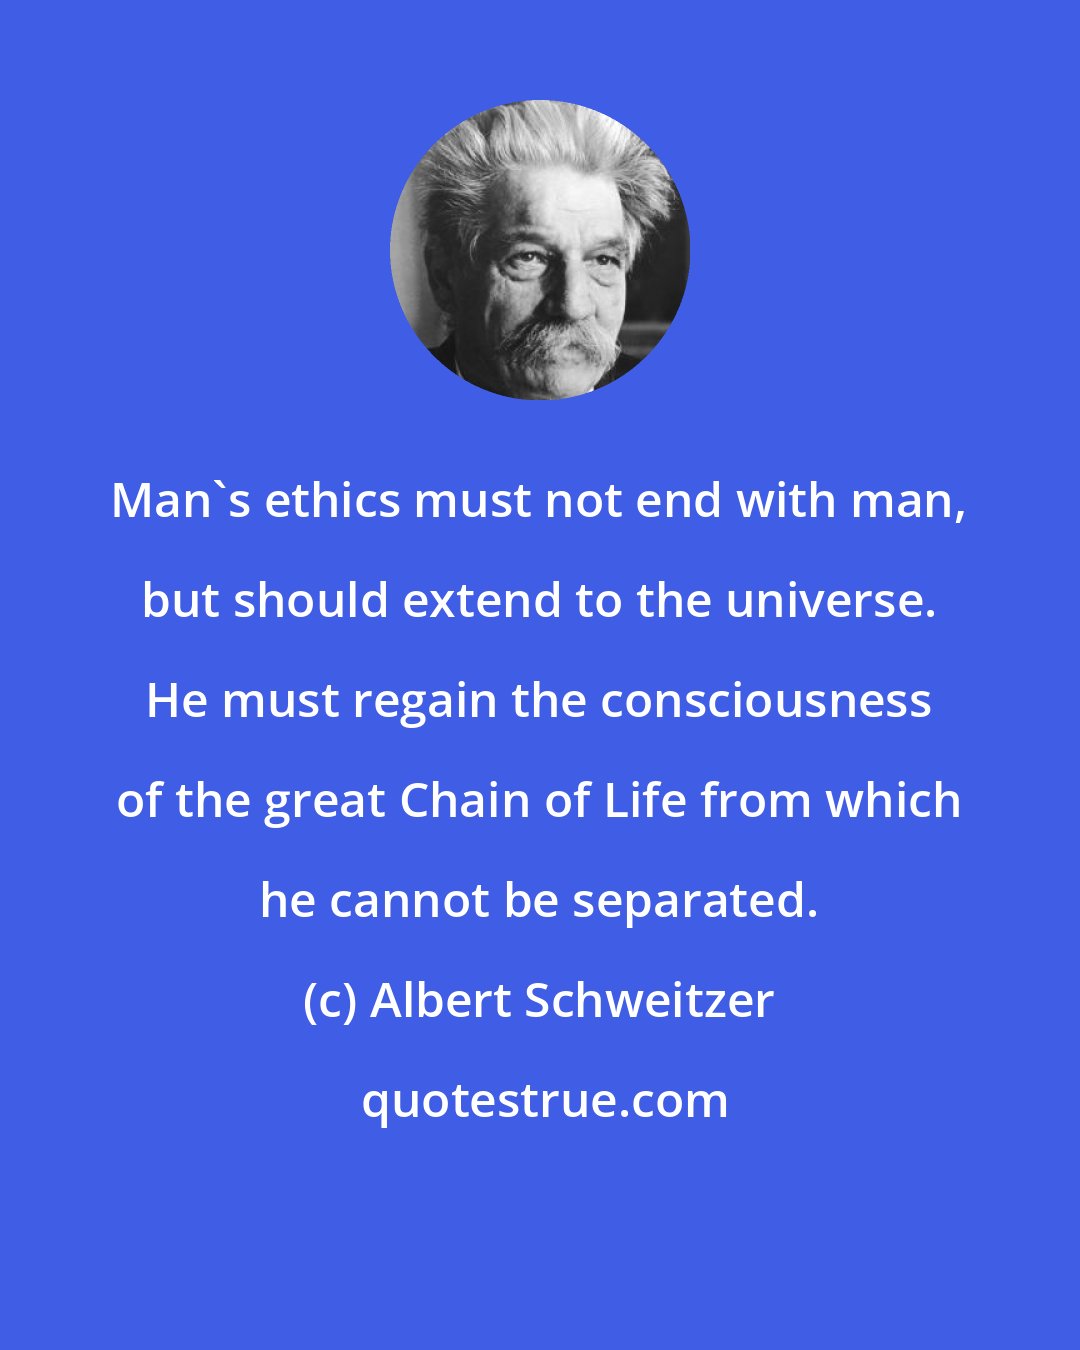 Albert Schweitzer: Man's ethics must not end with man, but should extend to the universe. He must regain the consciousness of the great Chain of Life from which he cannot be separated.